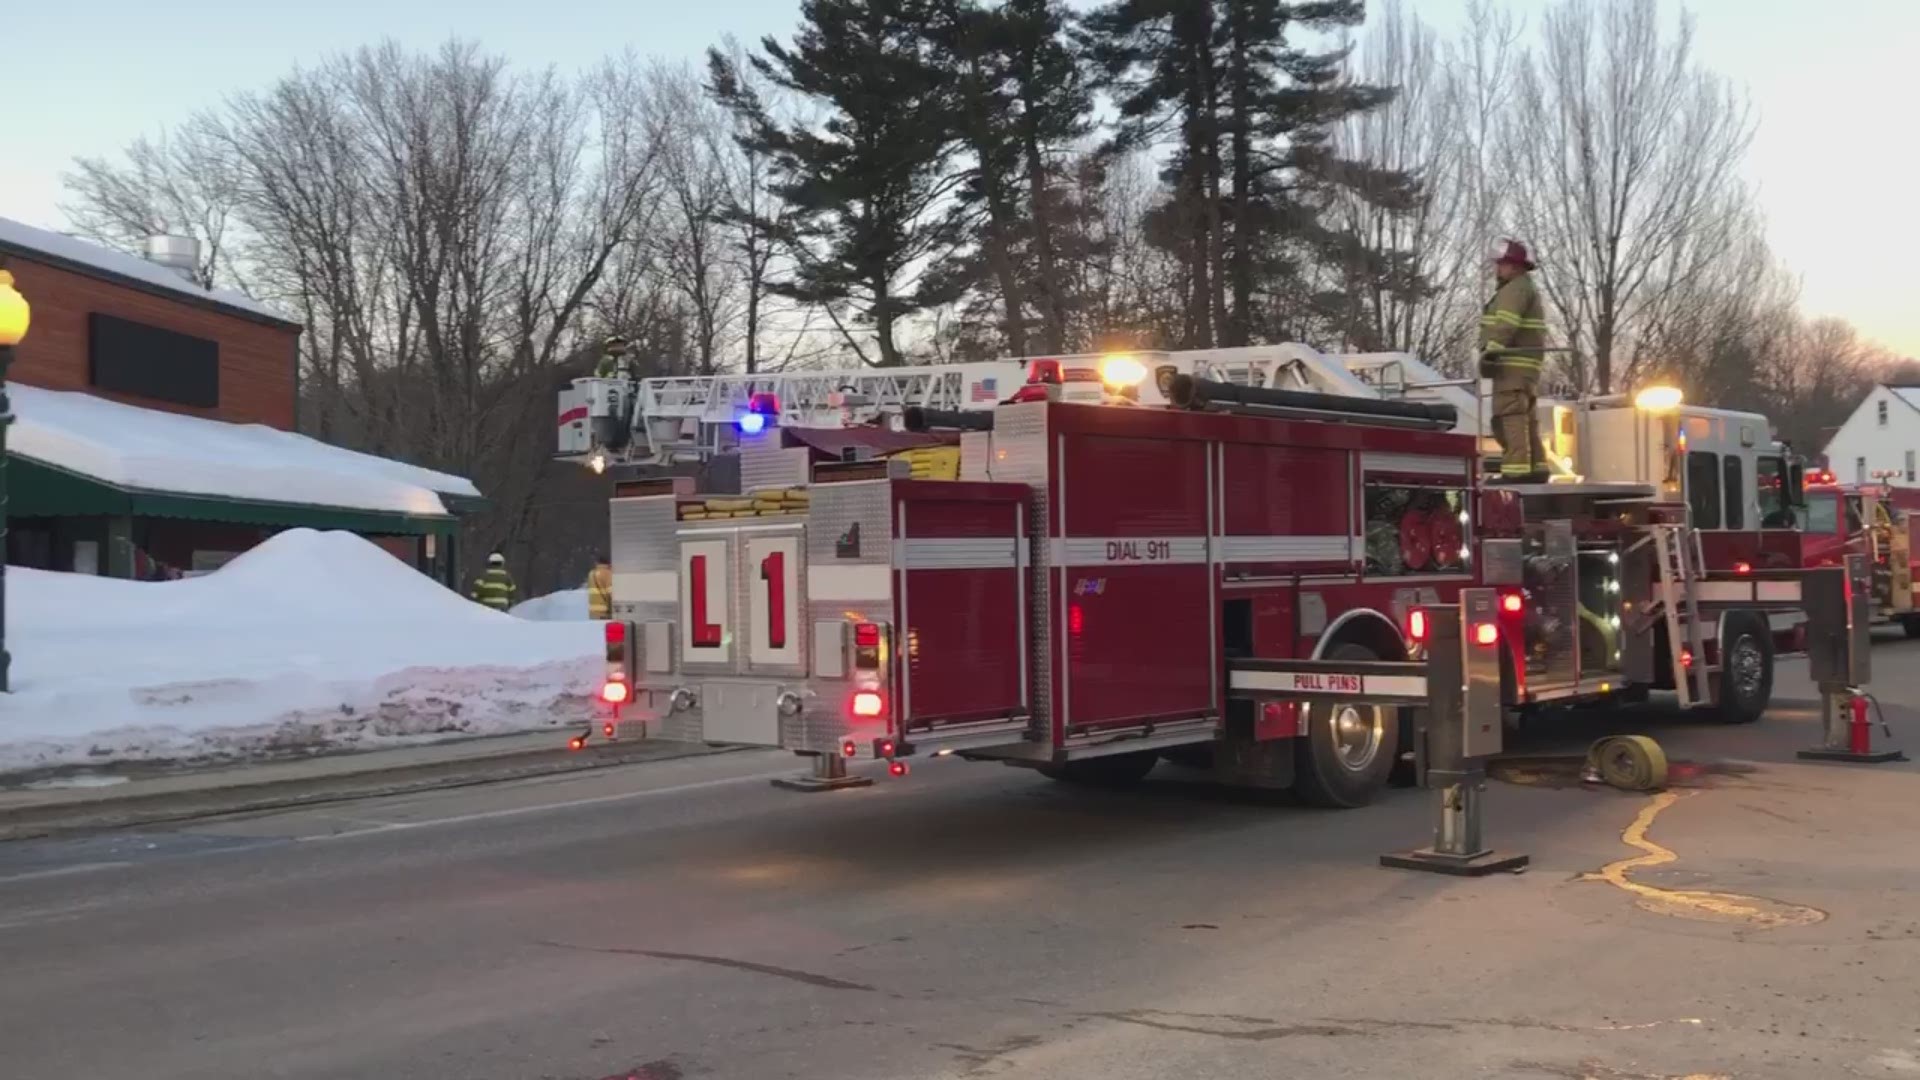 Video taken by NEWSCENTER Maine on the early morning fire in Bridgton on March 13.